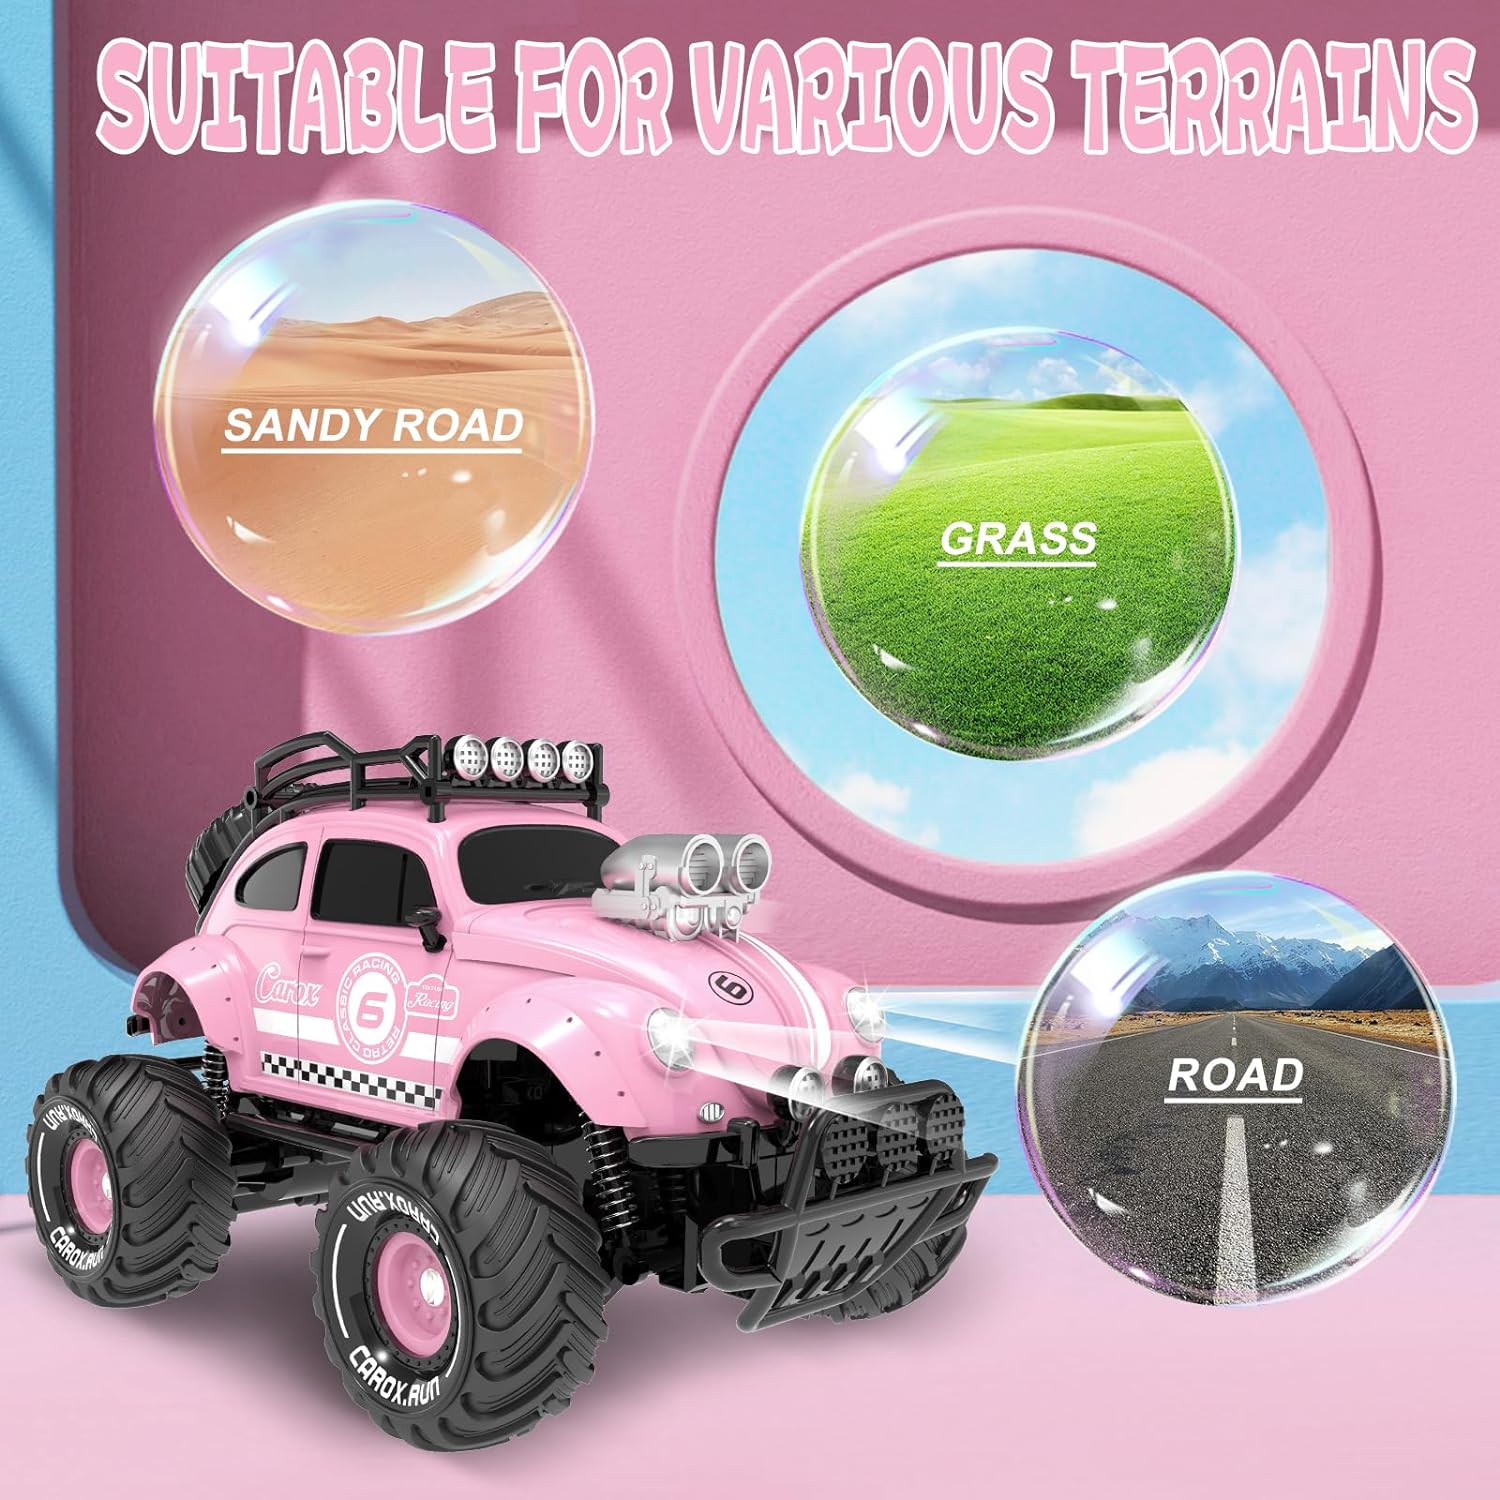 Carox Remote Control Car for Girls1:16 Scale-80 Mins Playtime Pink Classic Car with Cute LED Headlight for All Terrains-R/C Toys as Birthday for Girls (Pink)